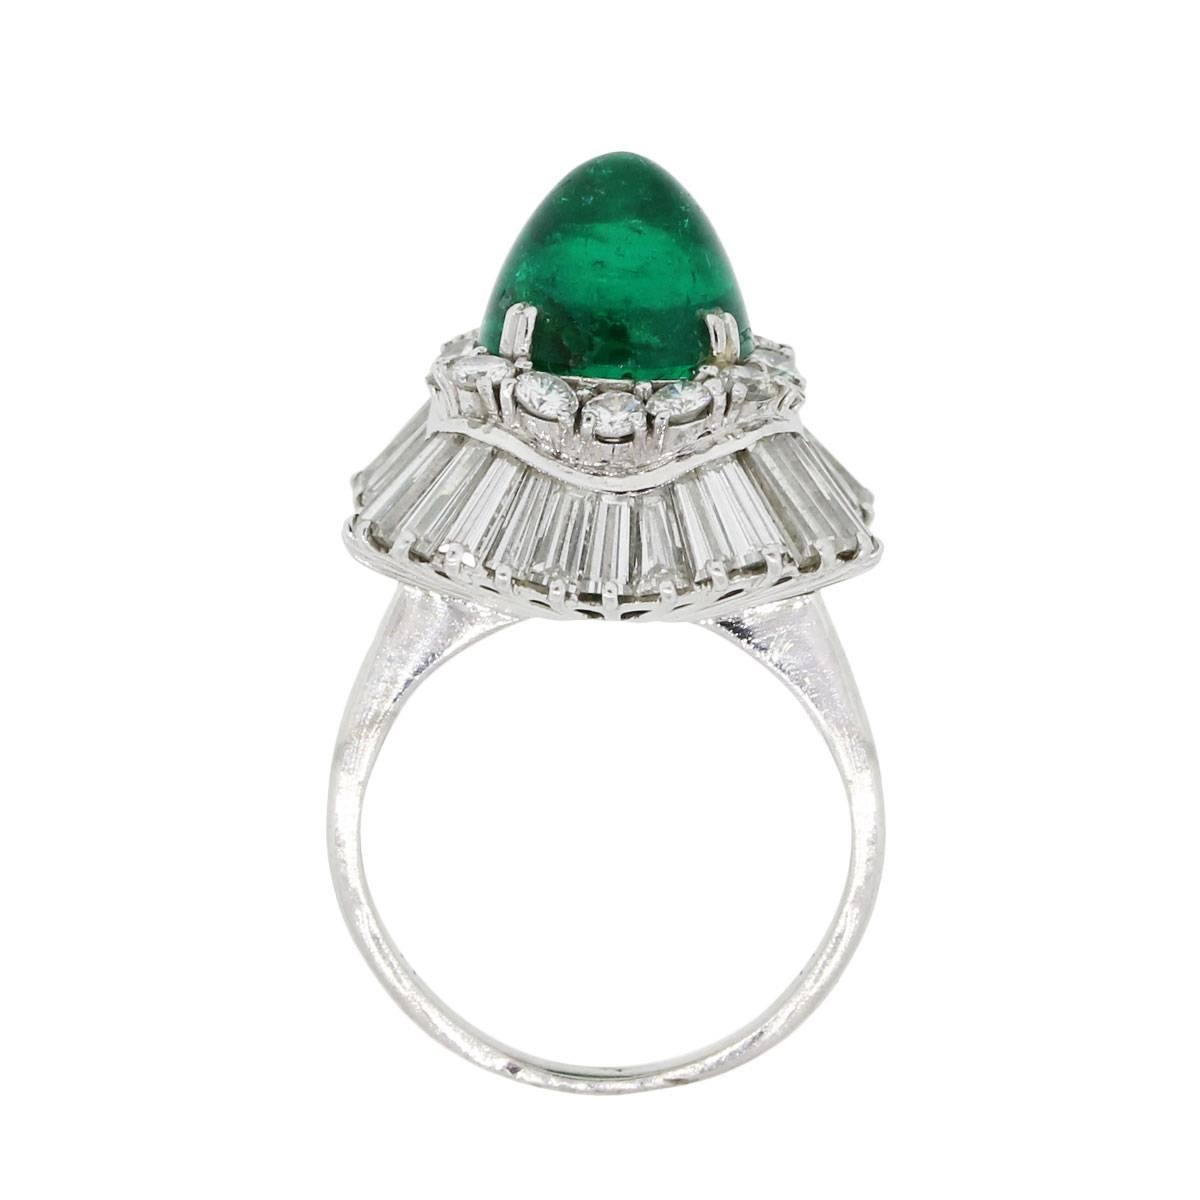 Style: Ballerina Cocktail Ring
Diamond Details: Approximately 2ctw of round brilliant and baguette shape diamonds. Diamonds are G/H in color and VS in clarity
Gemstone Details: Elongated cabochon emerald measuring approximately 10mm x 8mm
Ring Size: